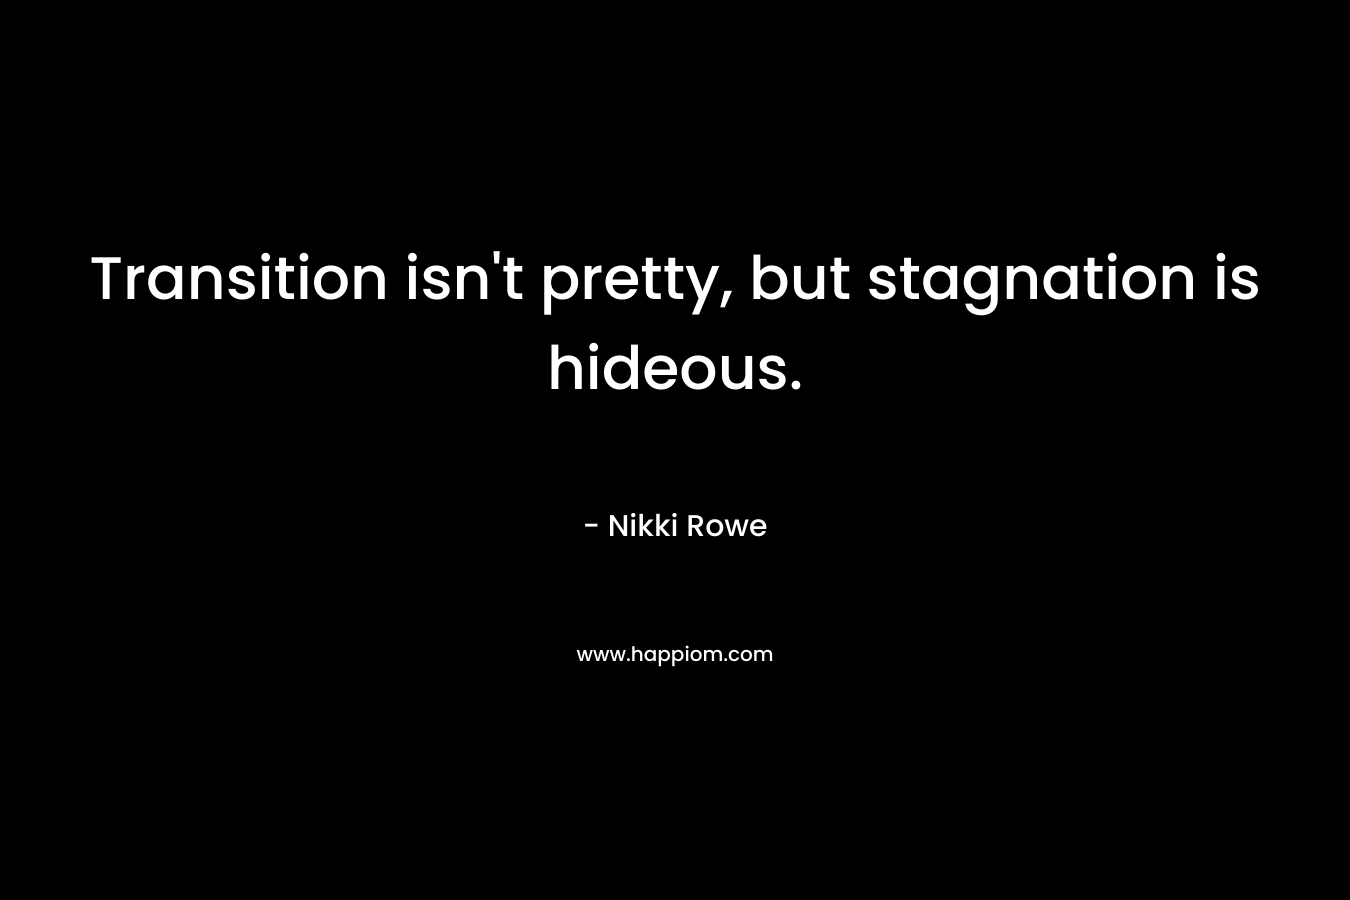 Transition isn’t pretty, but stagnation is hideous. – Nikki Rowe